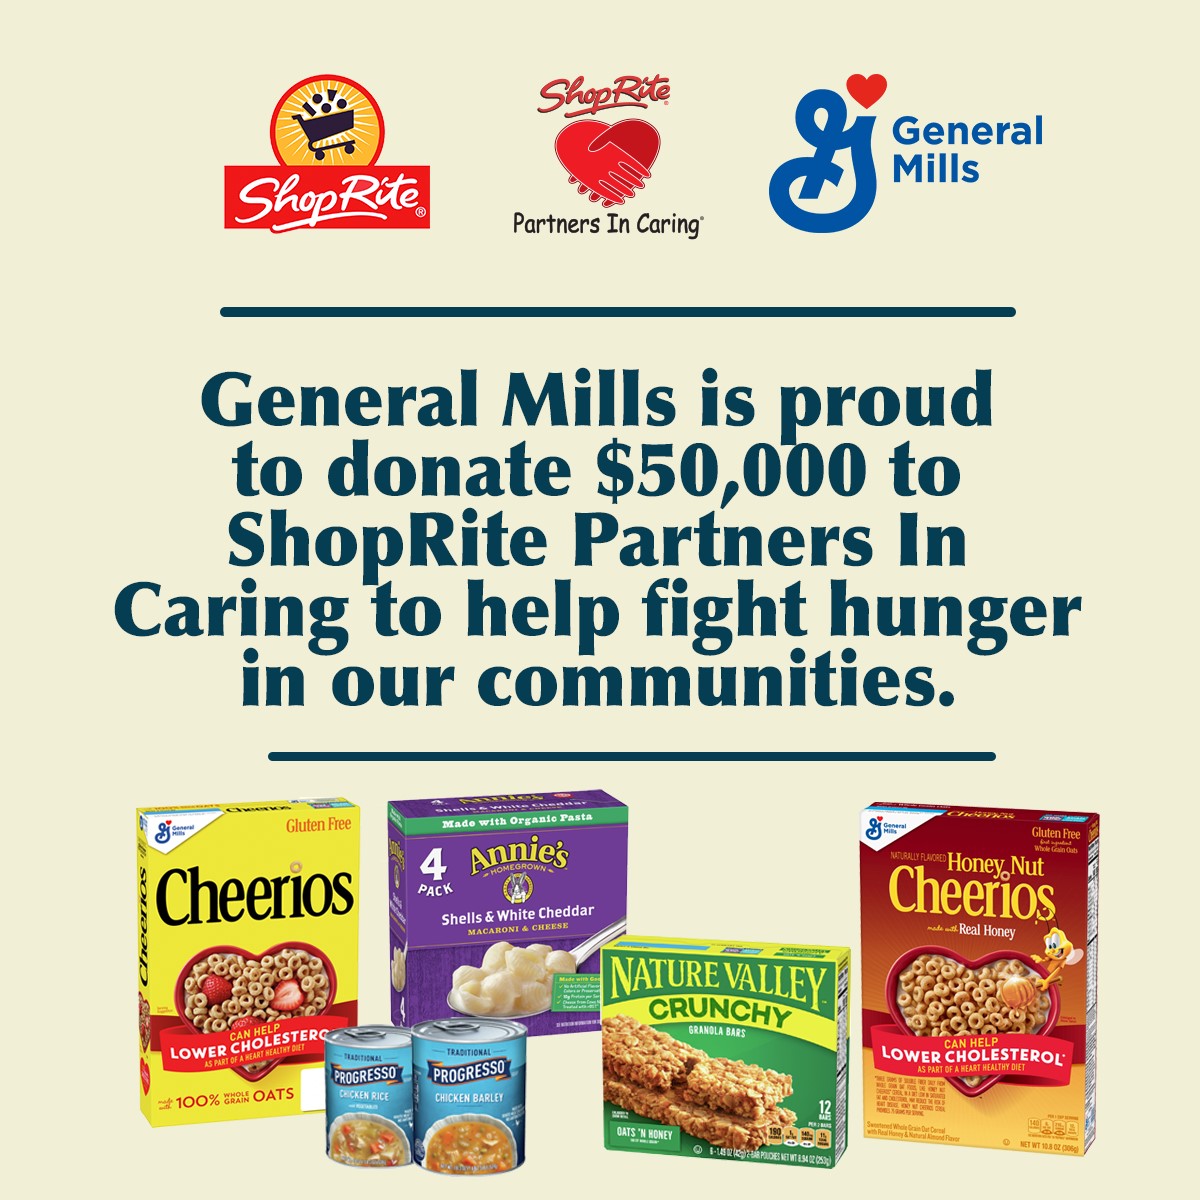 General Mills Donates $50,000 to ShopRite Partners In Caring